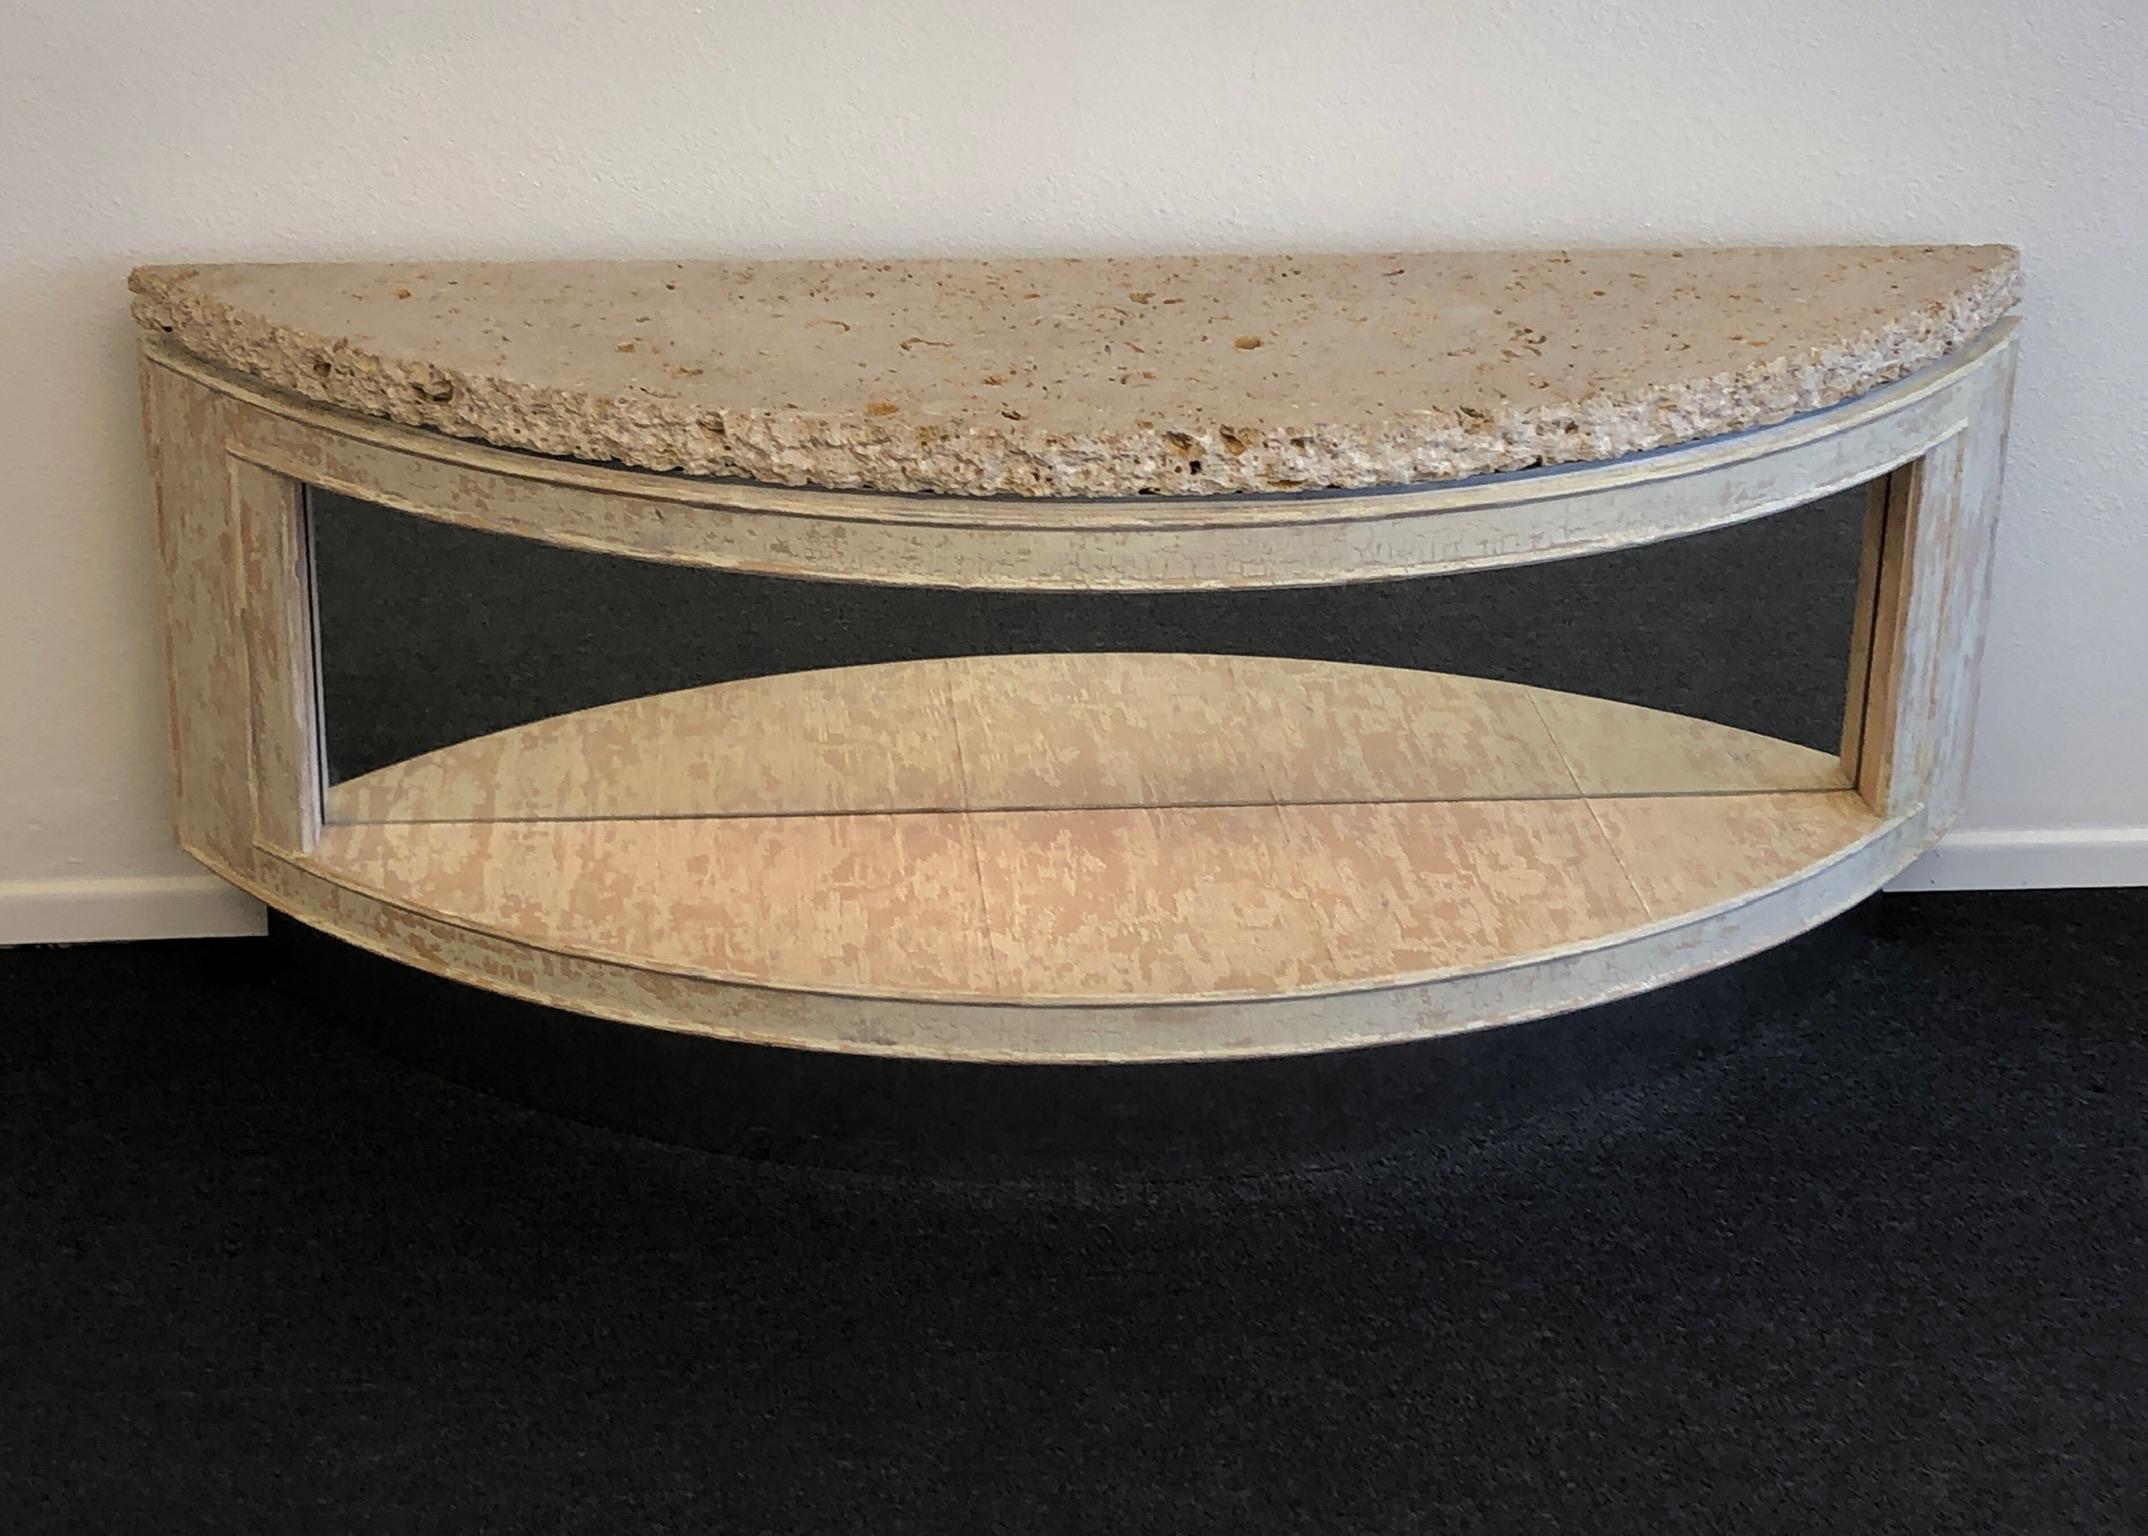 A beautiful 1980s custom design two tier “demilune” console table by Steve Chase. The console was designed for a house in Rancho Mirage. The console is constructed of wood with metal frame to support the heavy 2” fossil shell top, the bottom tier